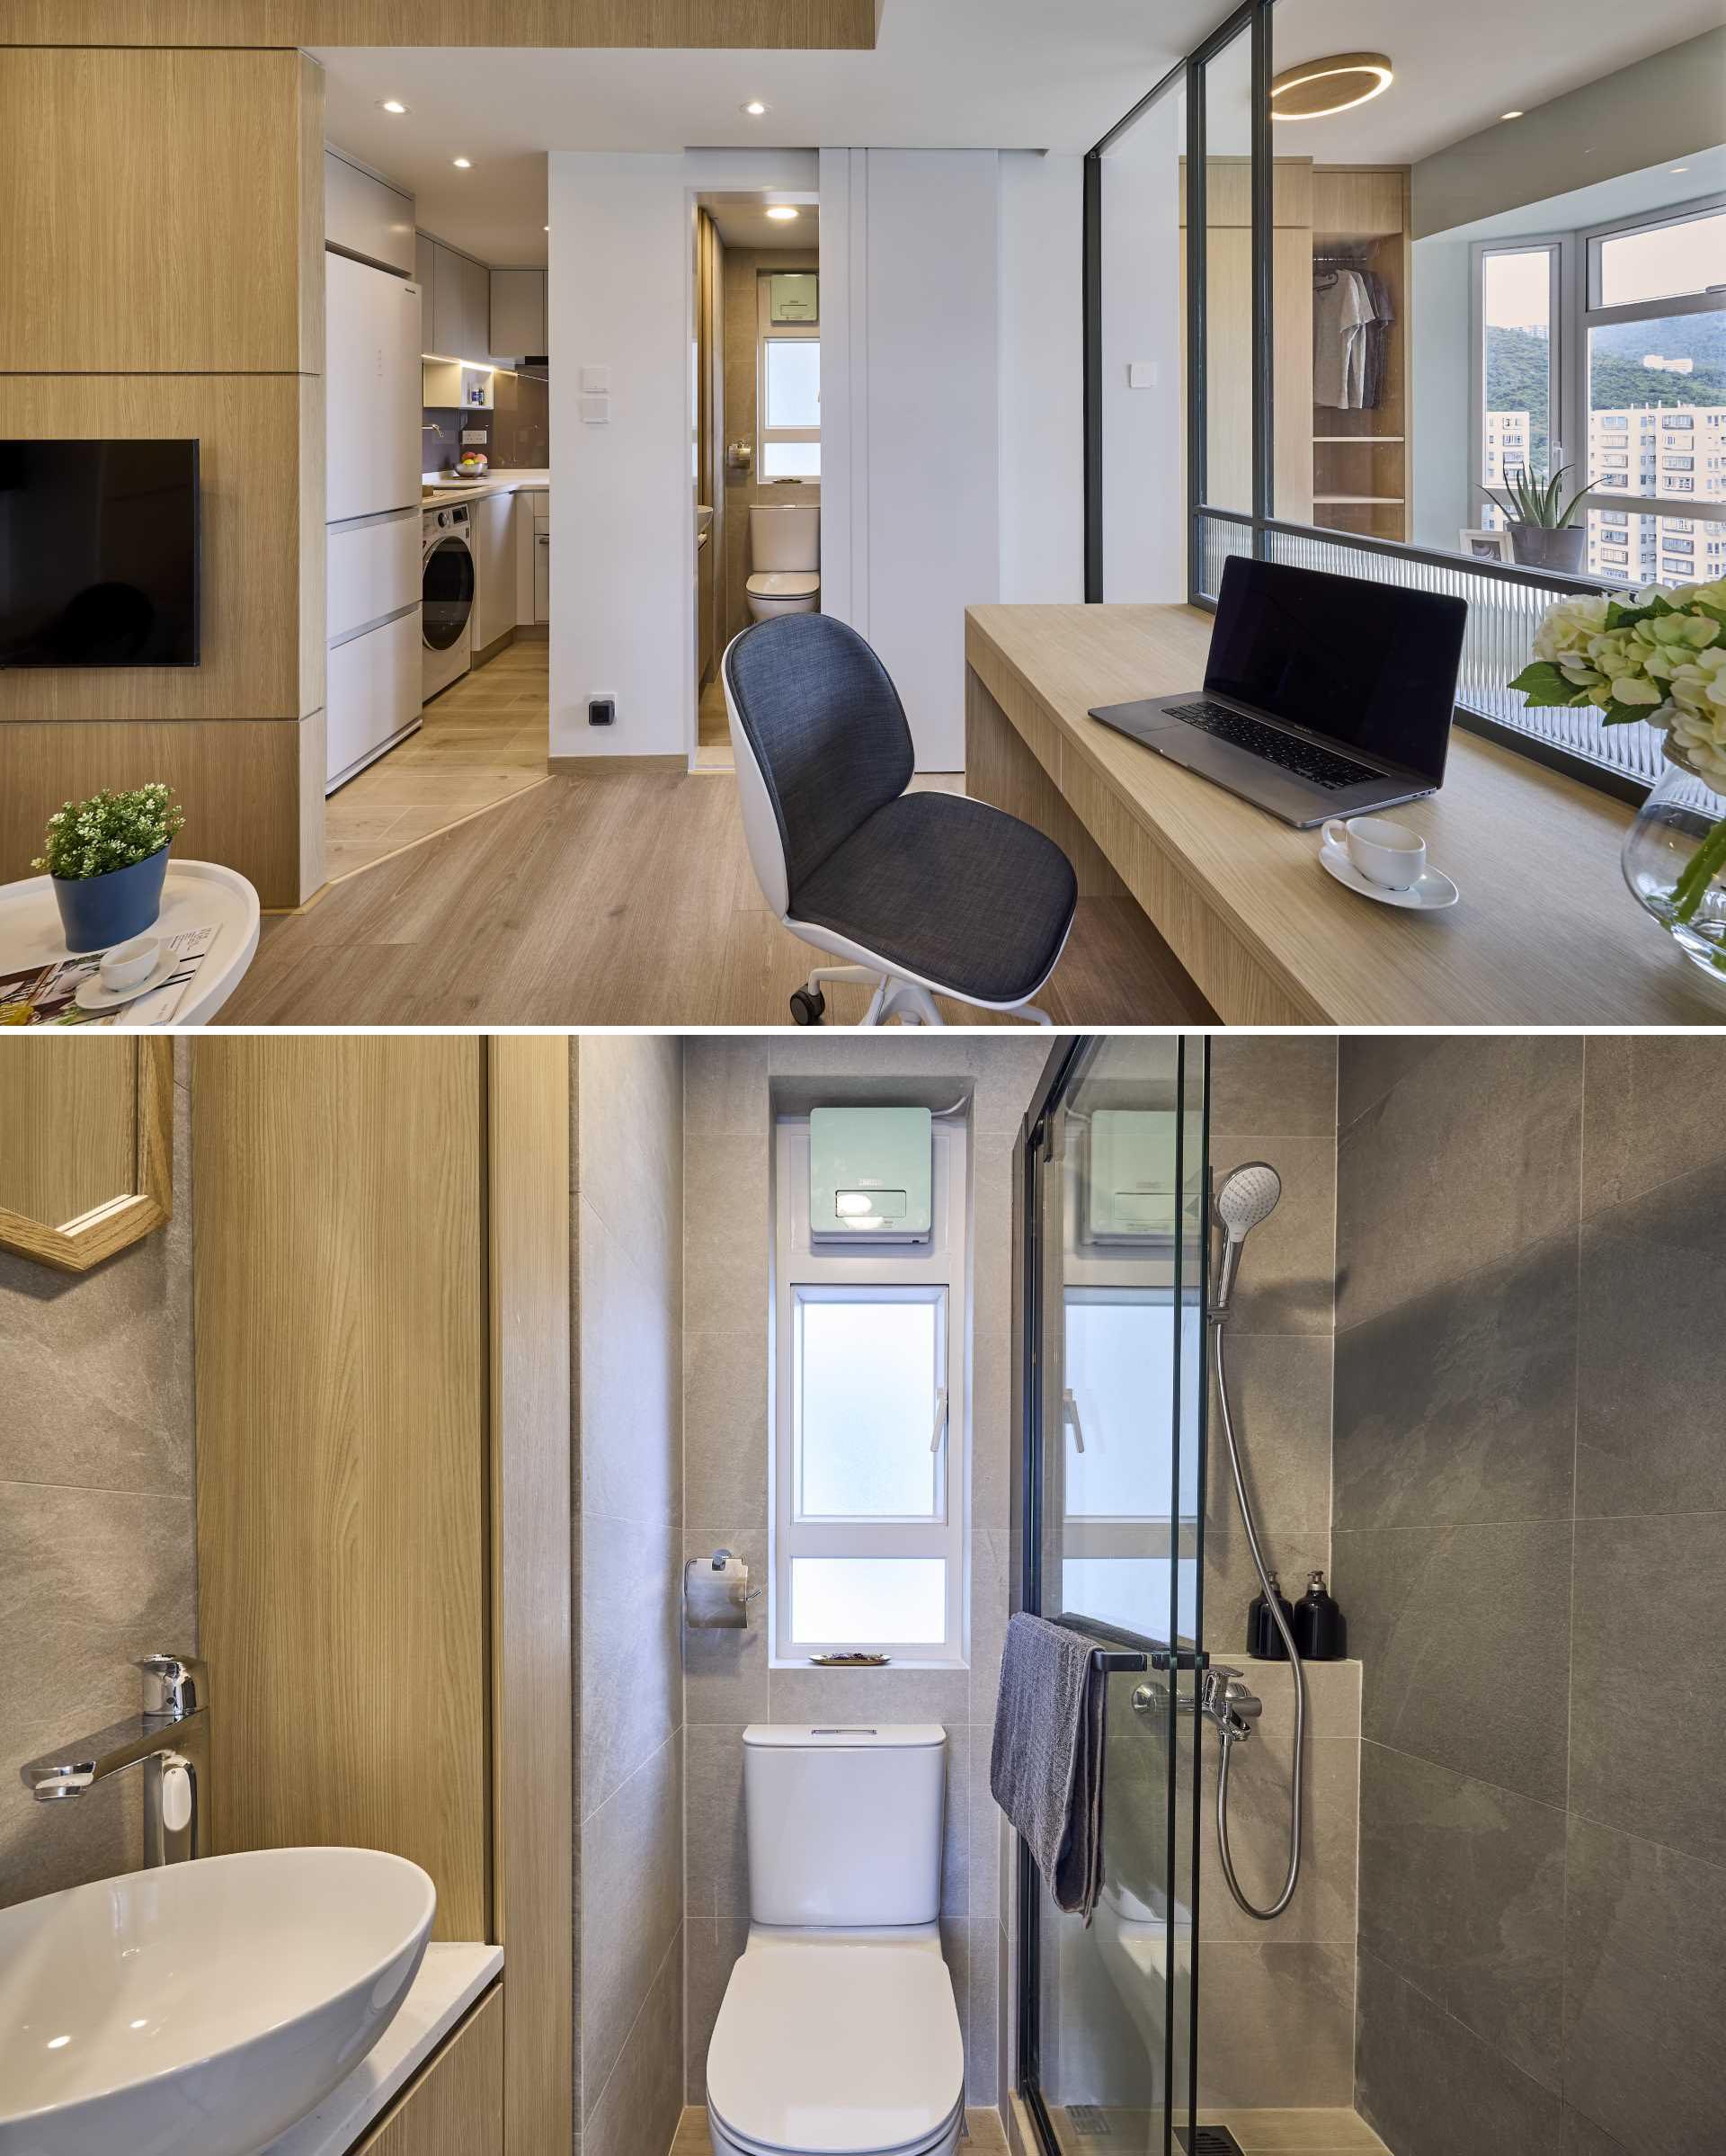 The bathroom in this small apartment is hidden behind a door that almost blends into the wall between the kitchen and bedroom. The small bathroom has a toilet, shower, a vanity area, a window, and a storage.